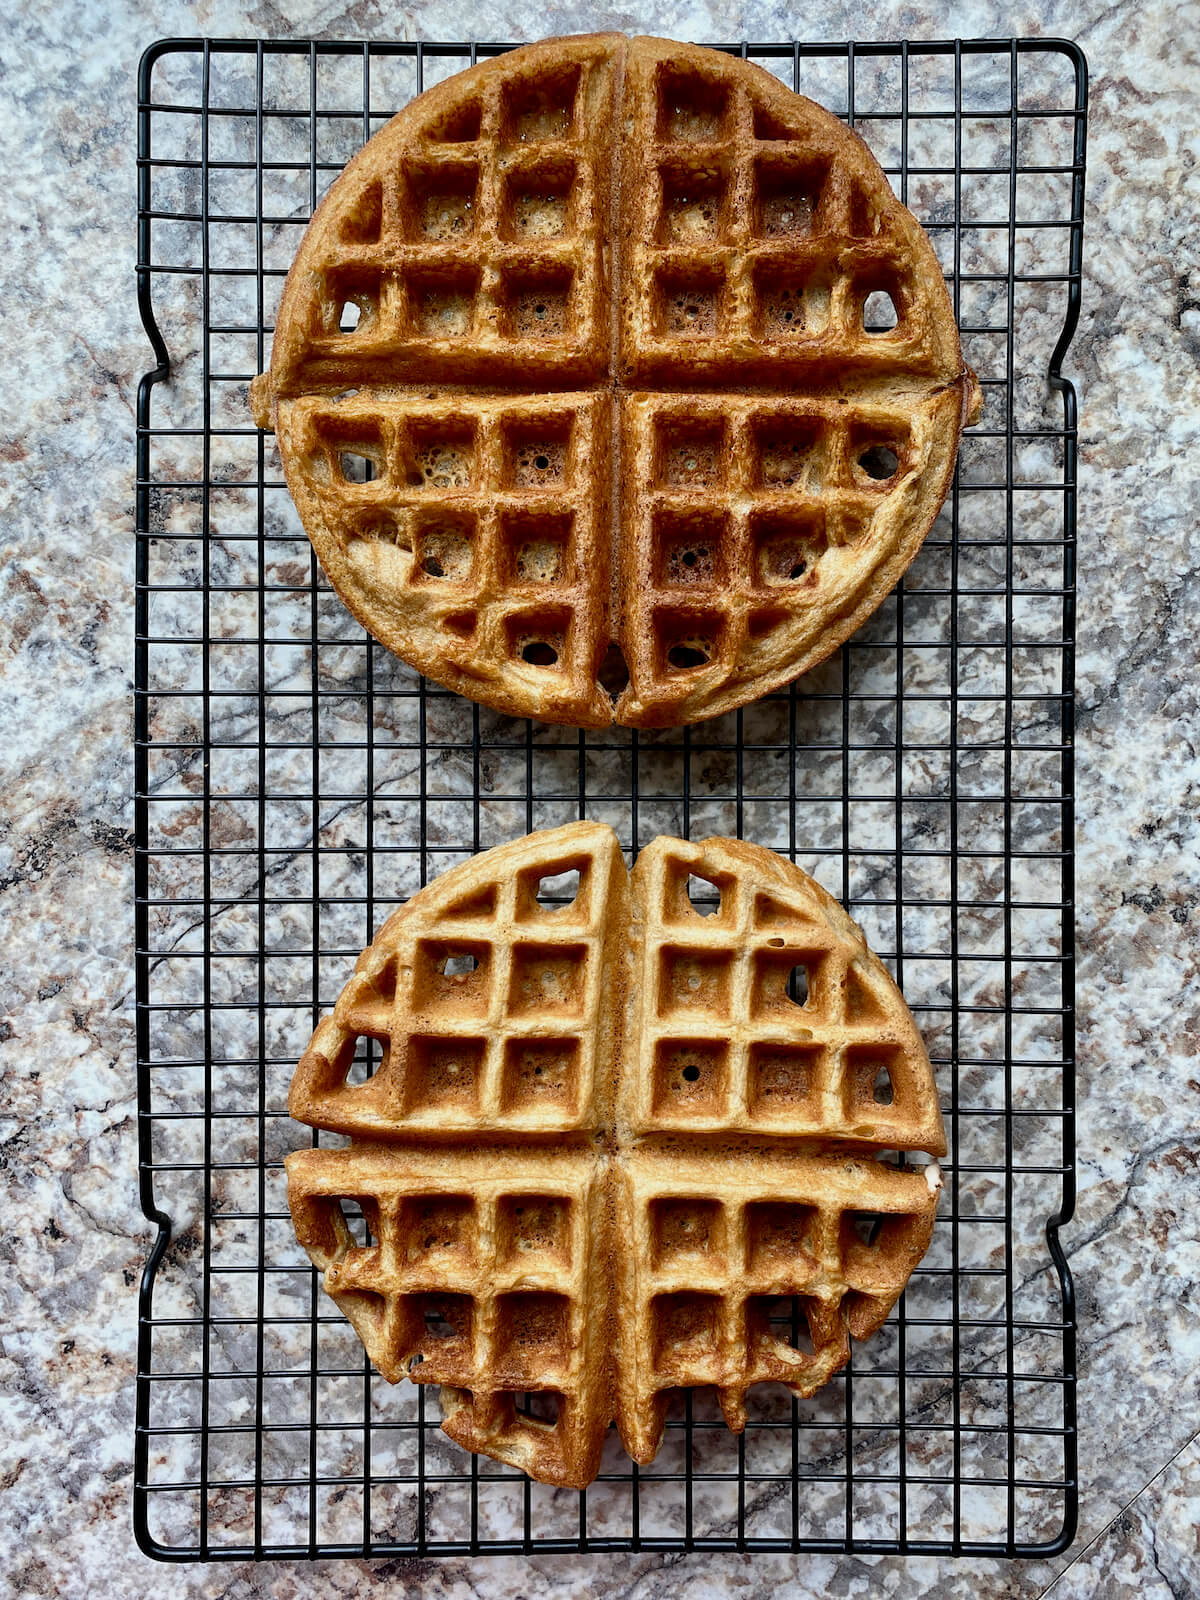 Two finished oat flour waffles on a cooling rack.